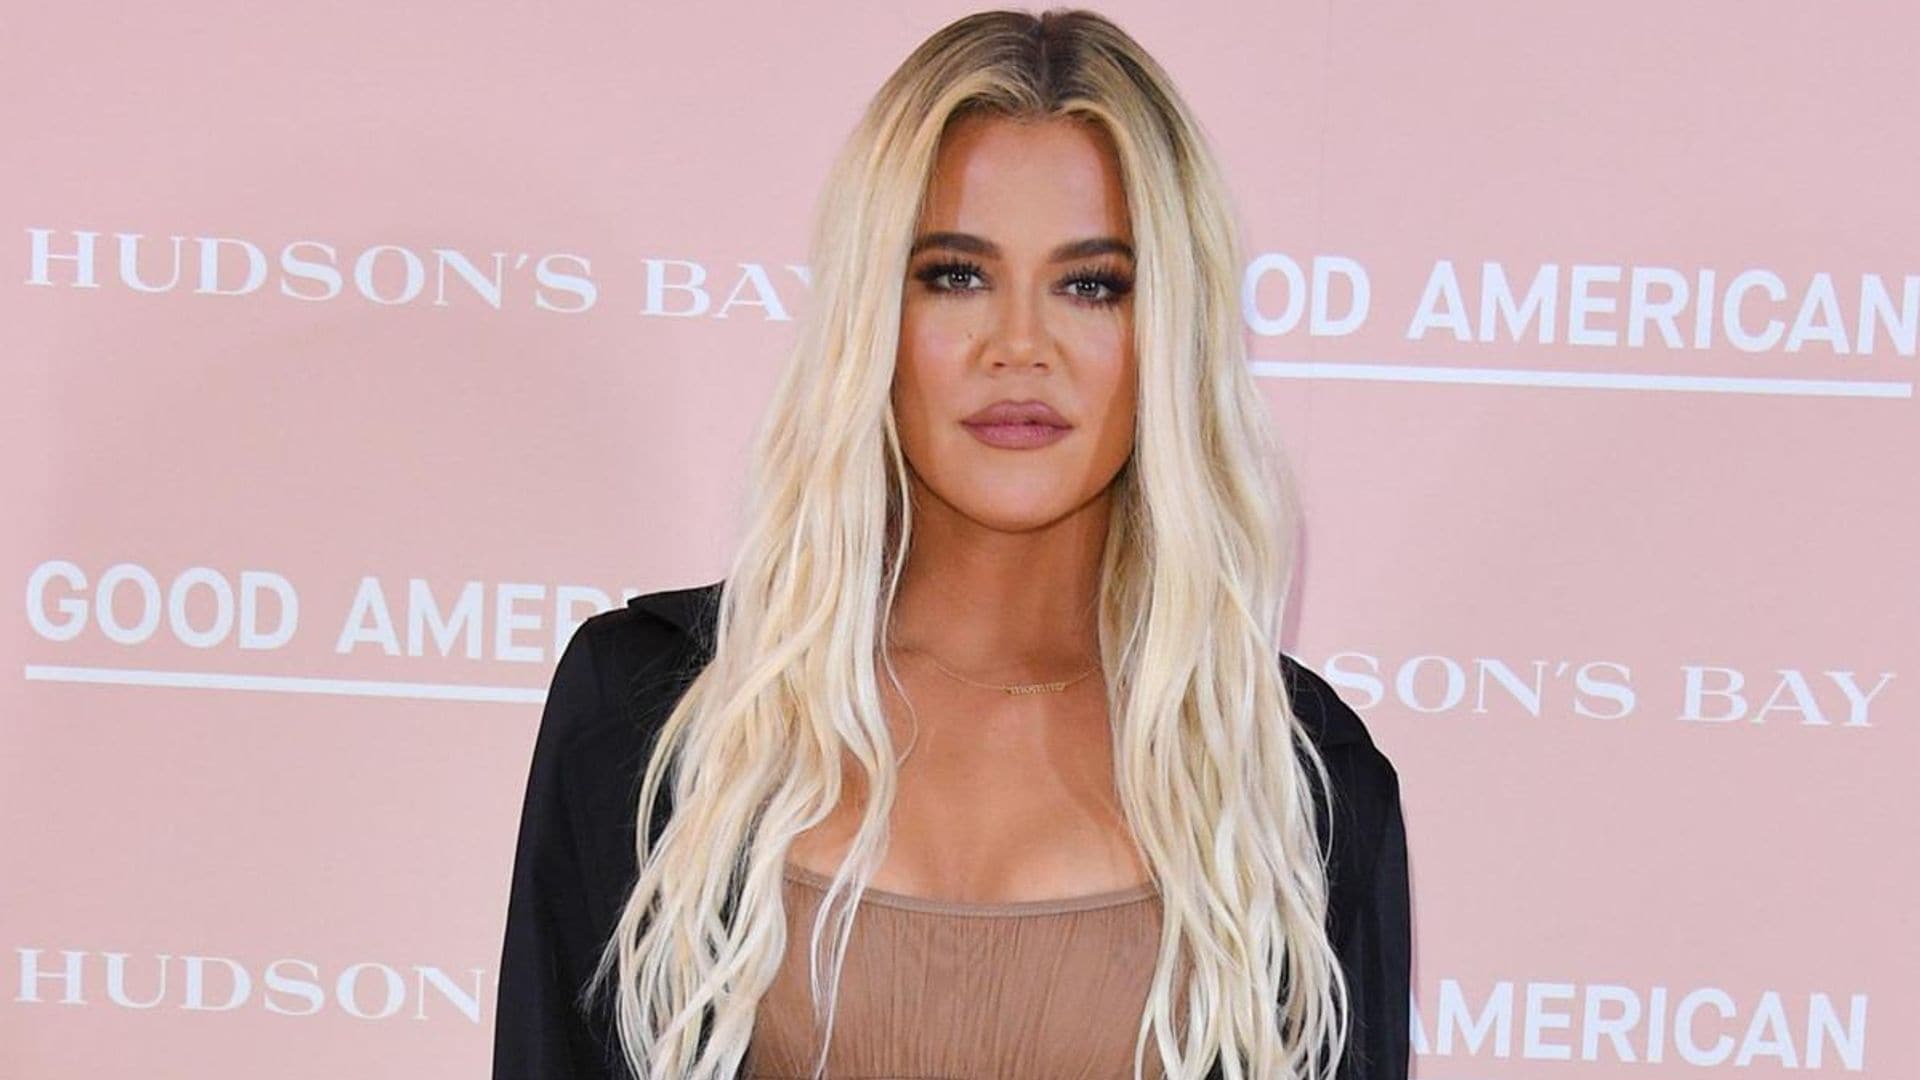 Khloé Kardashian looked glamorous while promoting her Good American thigh-high boots